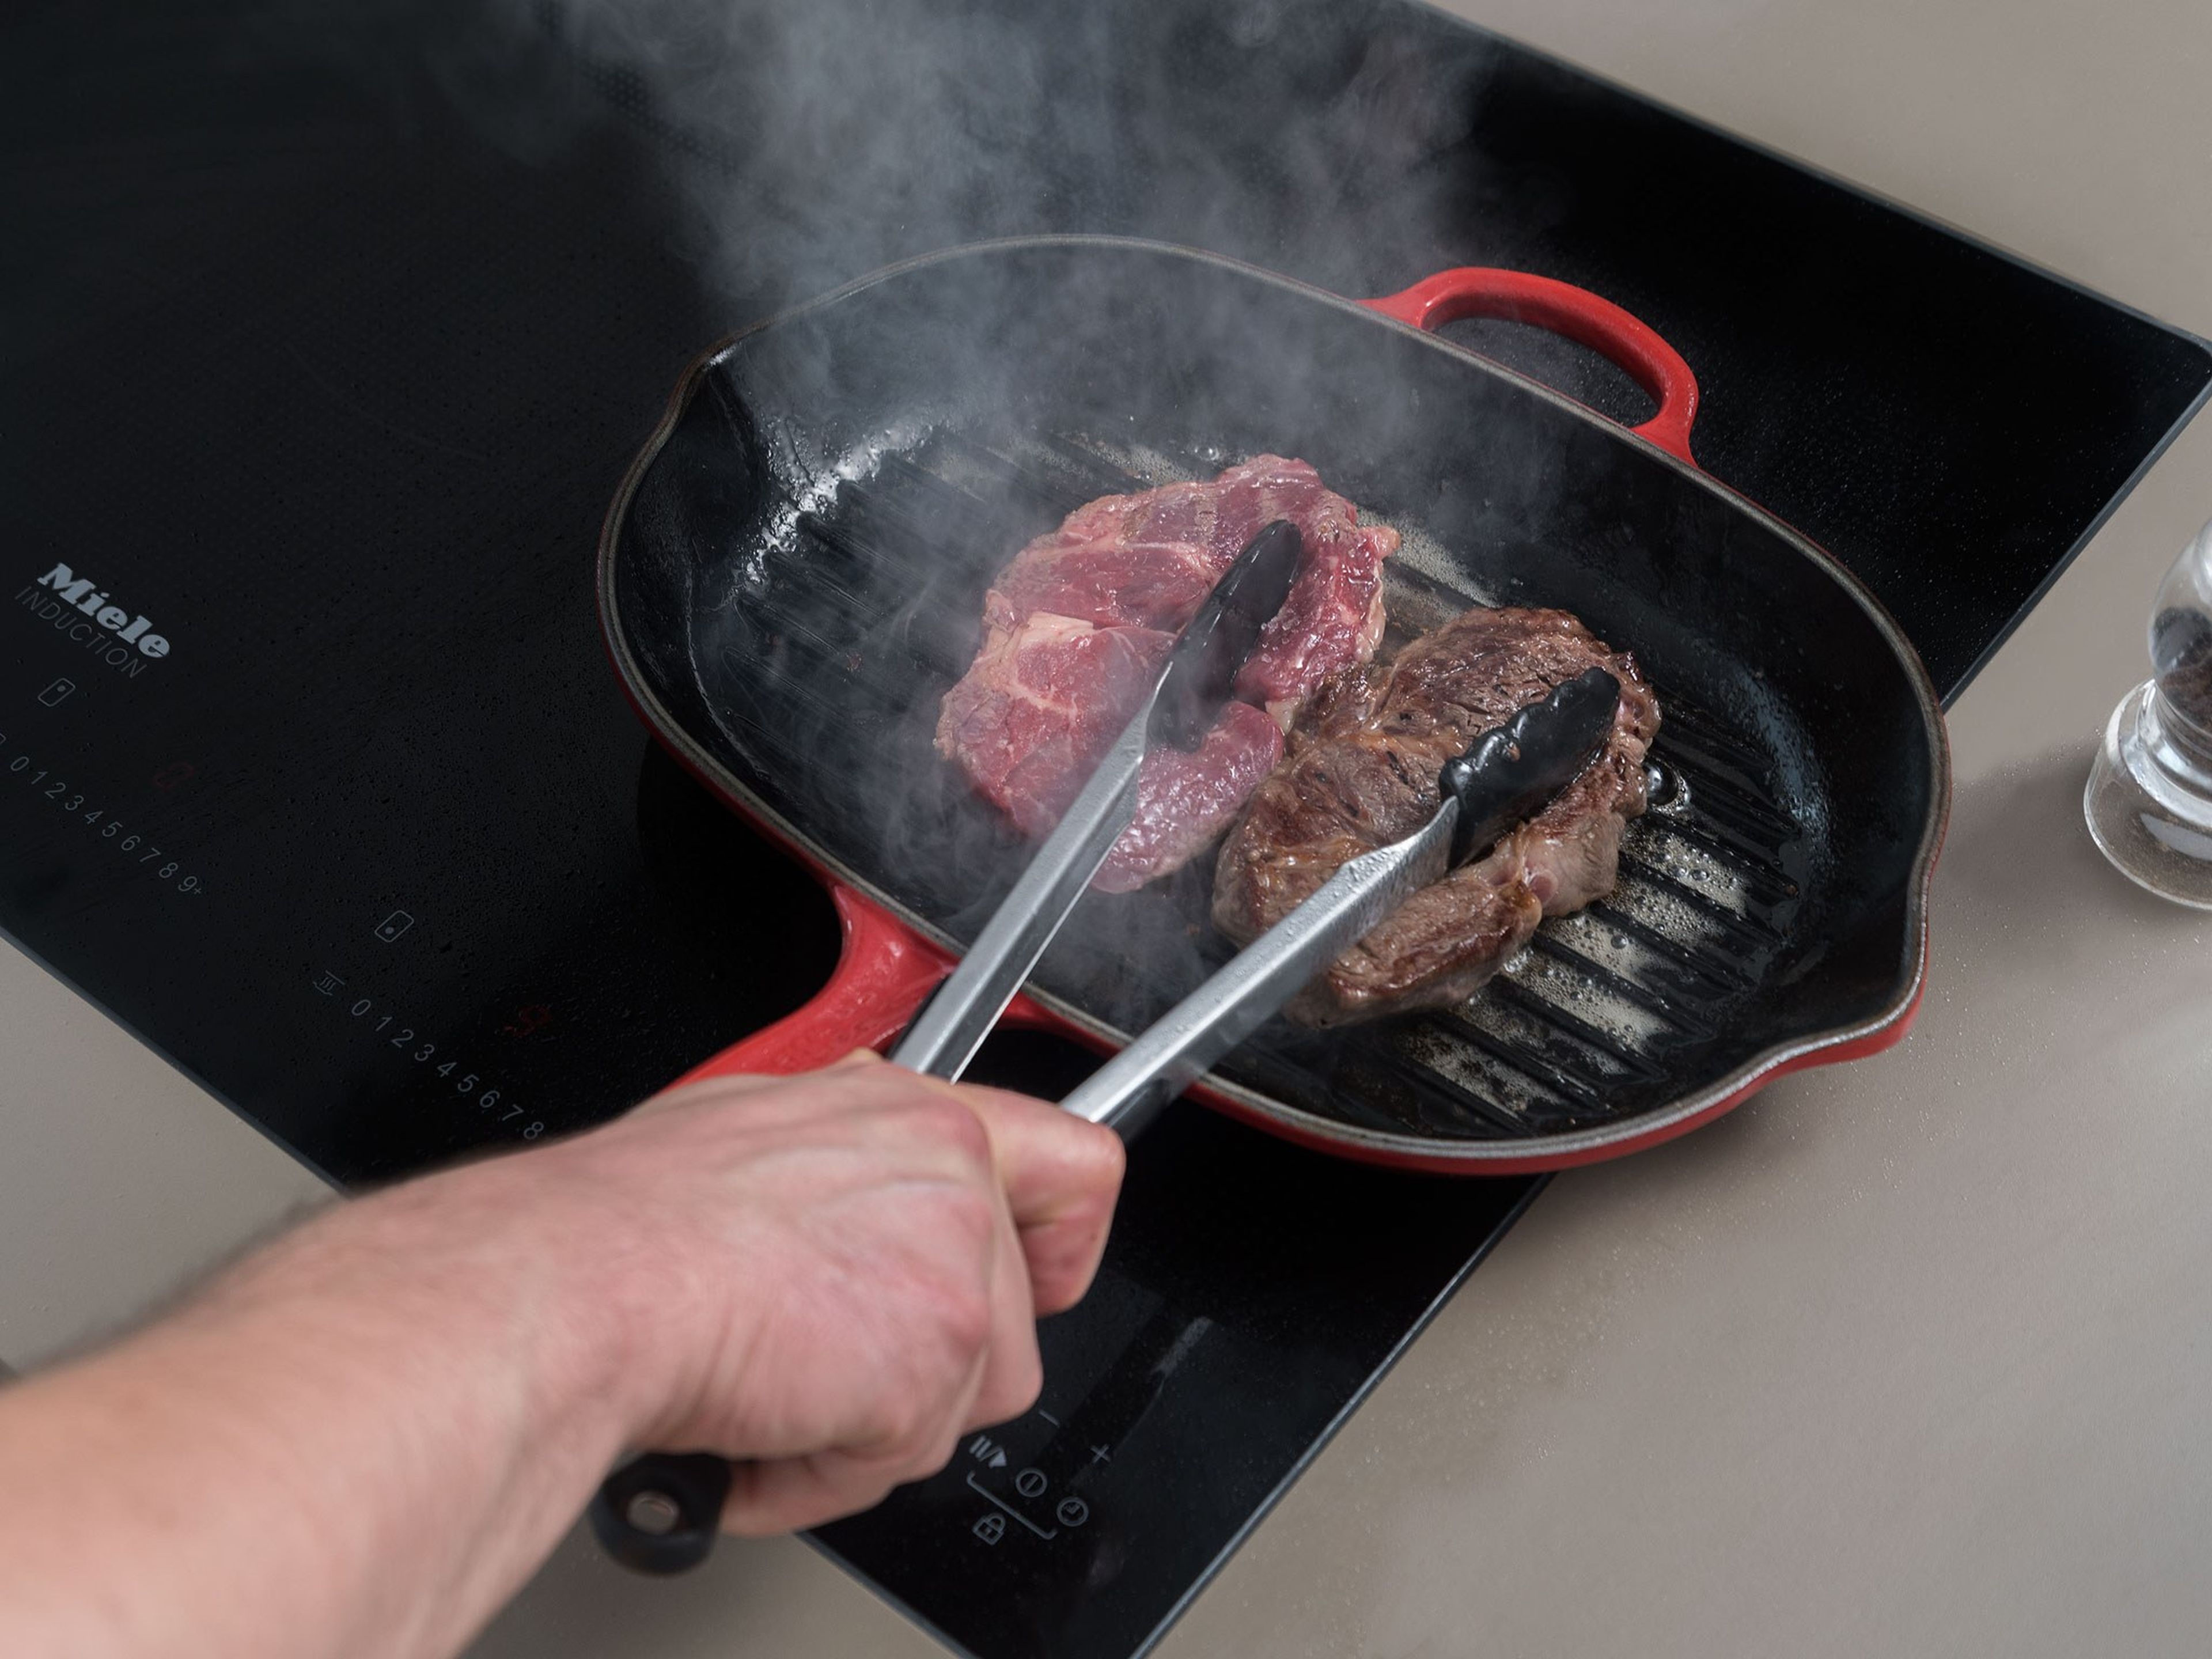 Reduce oven temperature to 160°C/325°F. Heat oil in a grill pan set over medium-high heat. Salt steaks and transfer to grill pan. Sear on both sides for approx. 3 – 4 min. When browned, transfer to a baking sheet and bake in the oven for approx. 4 min.